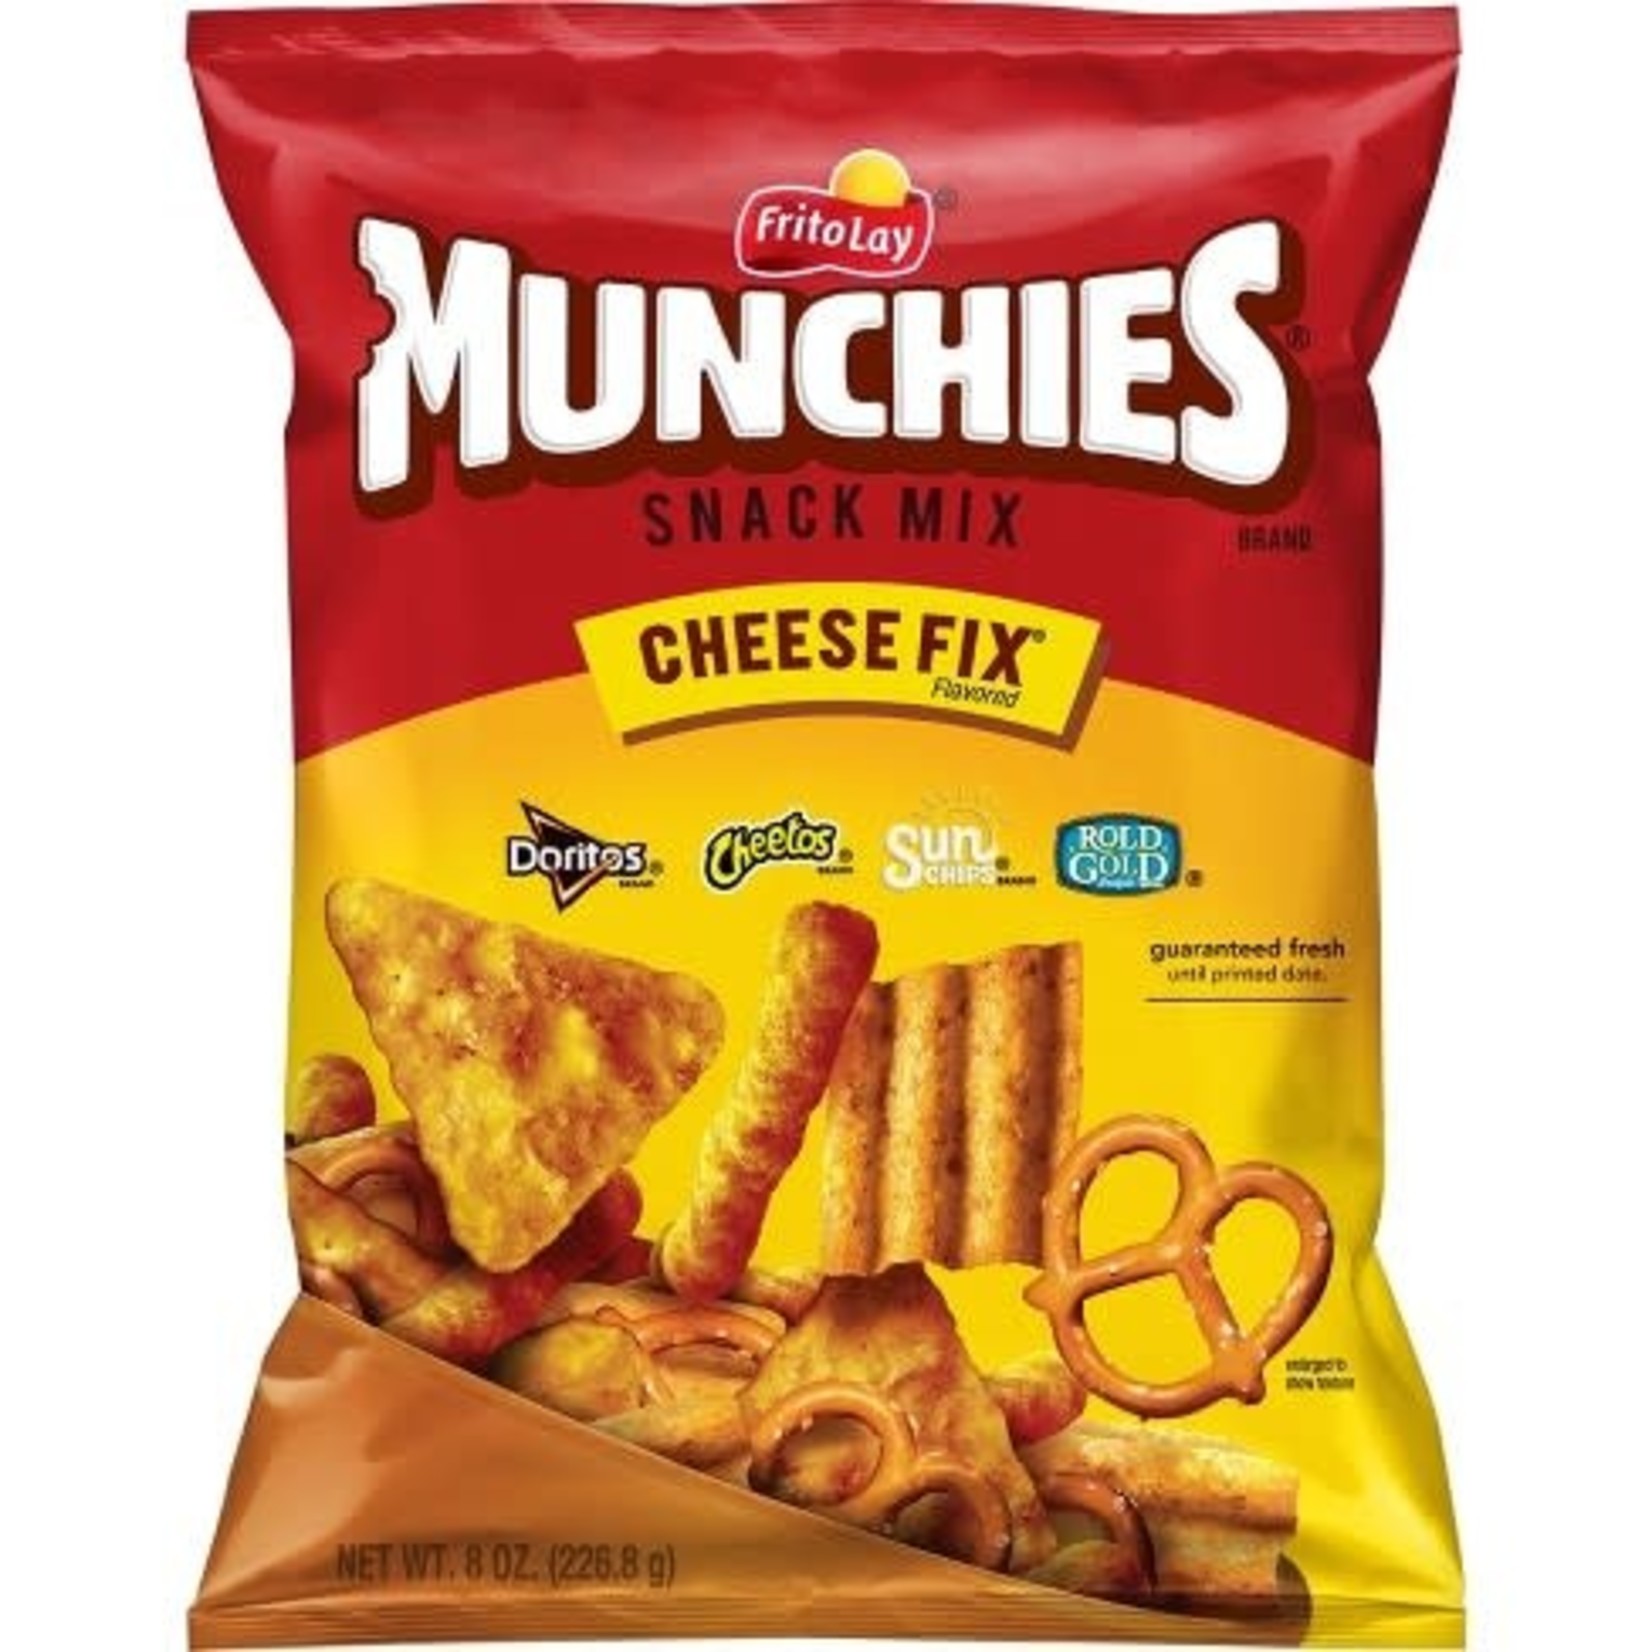 Munchies Cheese Fix Flavored Snack Mix 8 oz